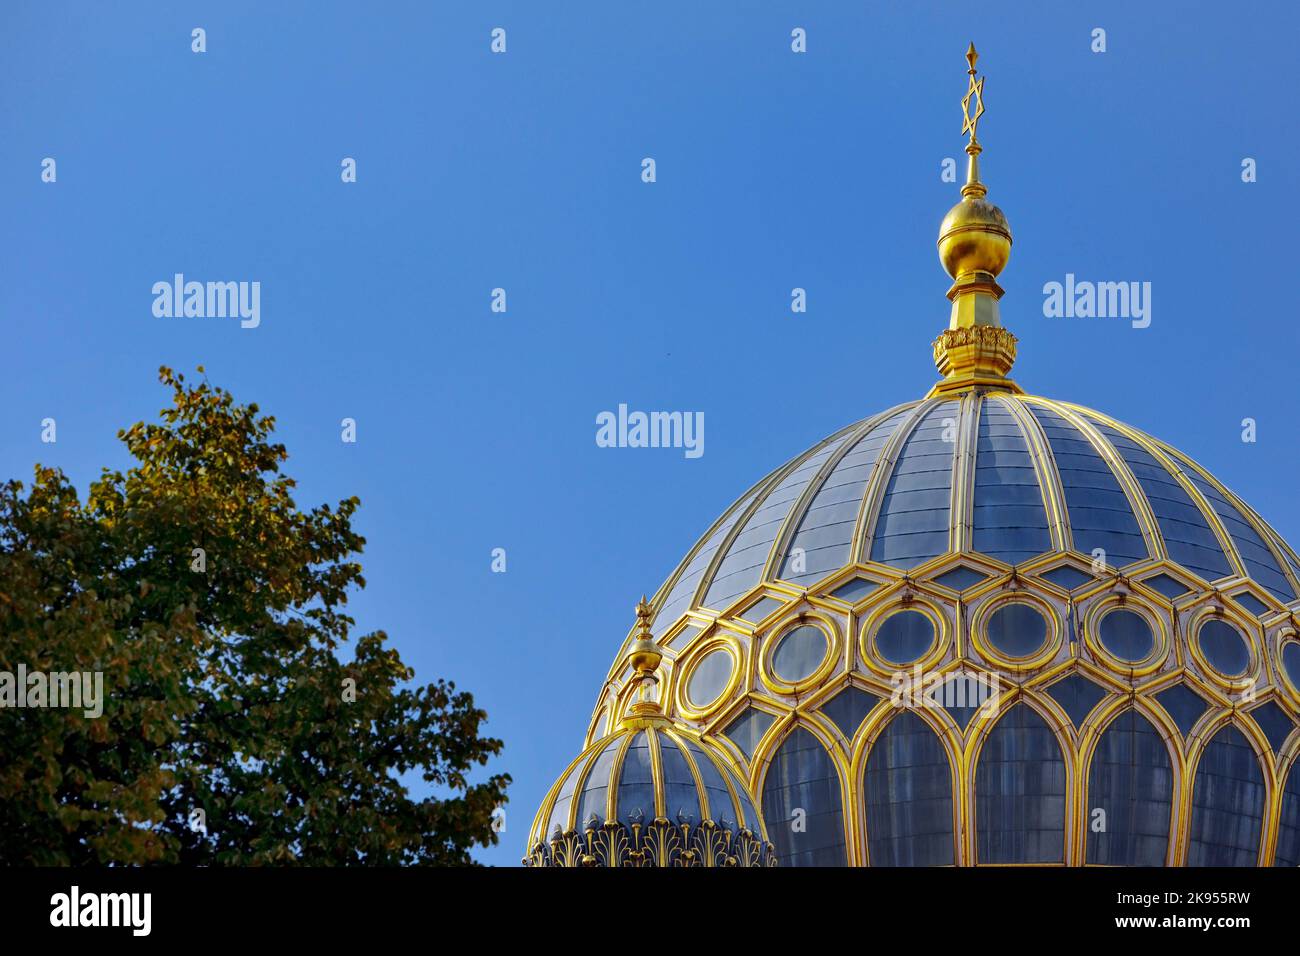 New Synagogue, tambour dome covered with gilded ribs, Germany, Berlin Stock Photo